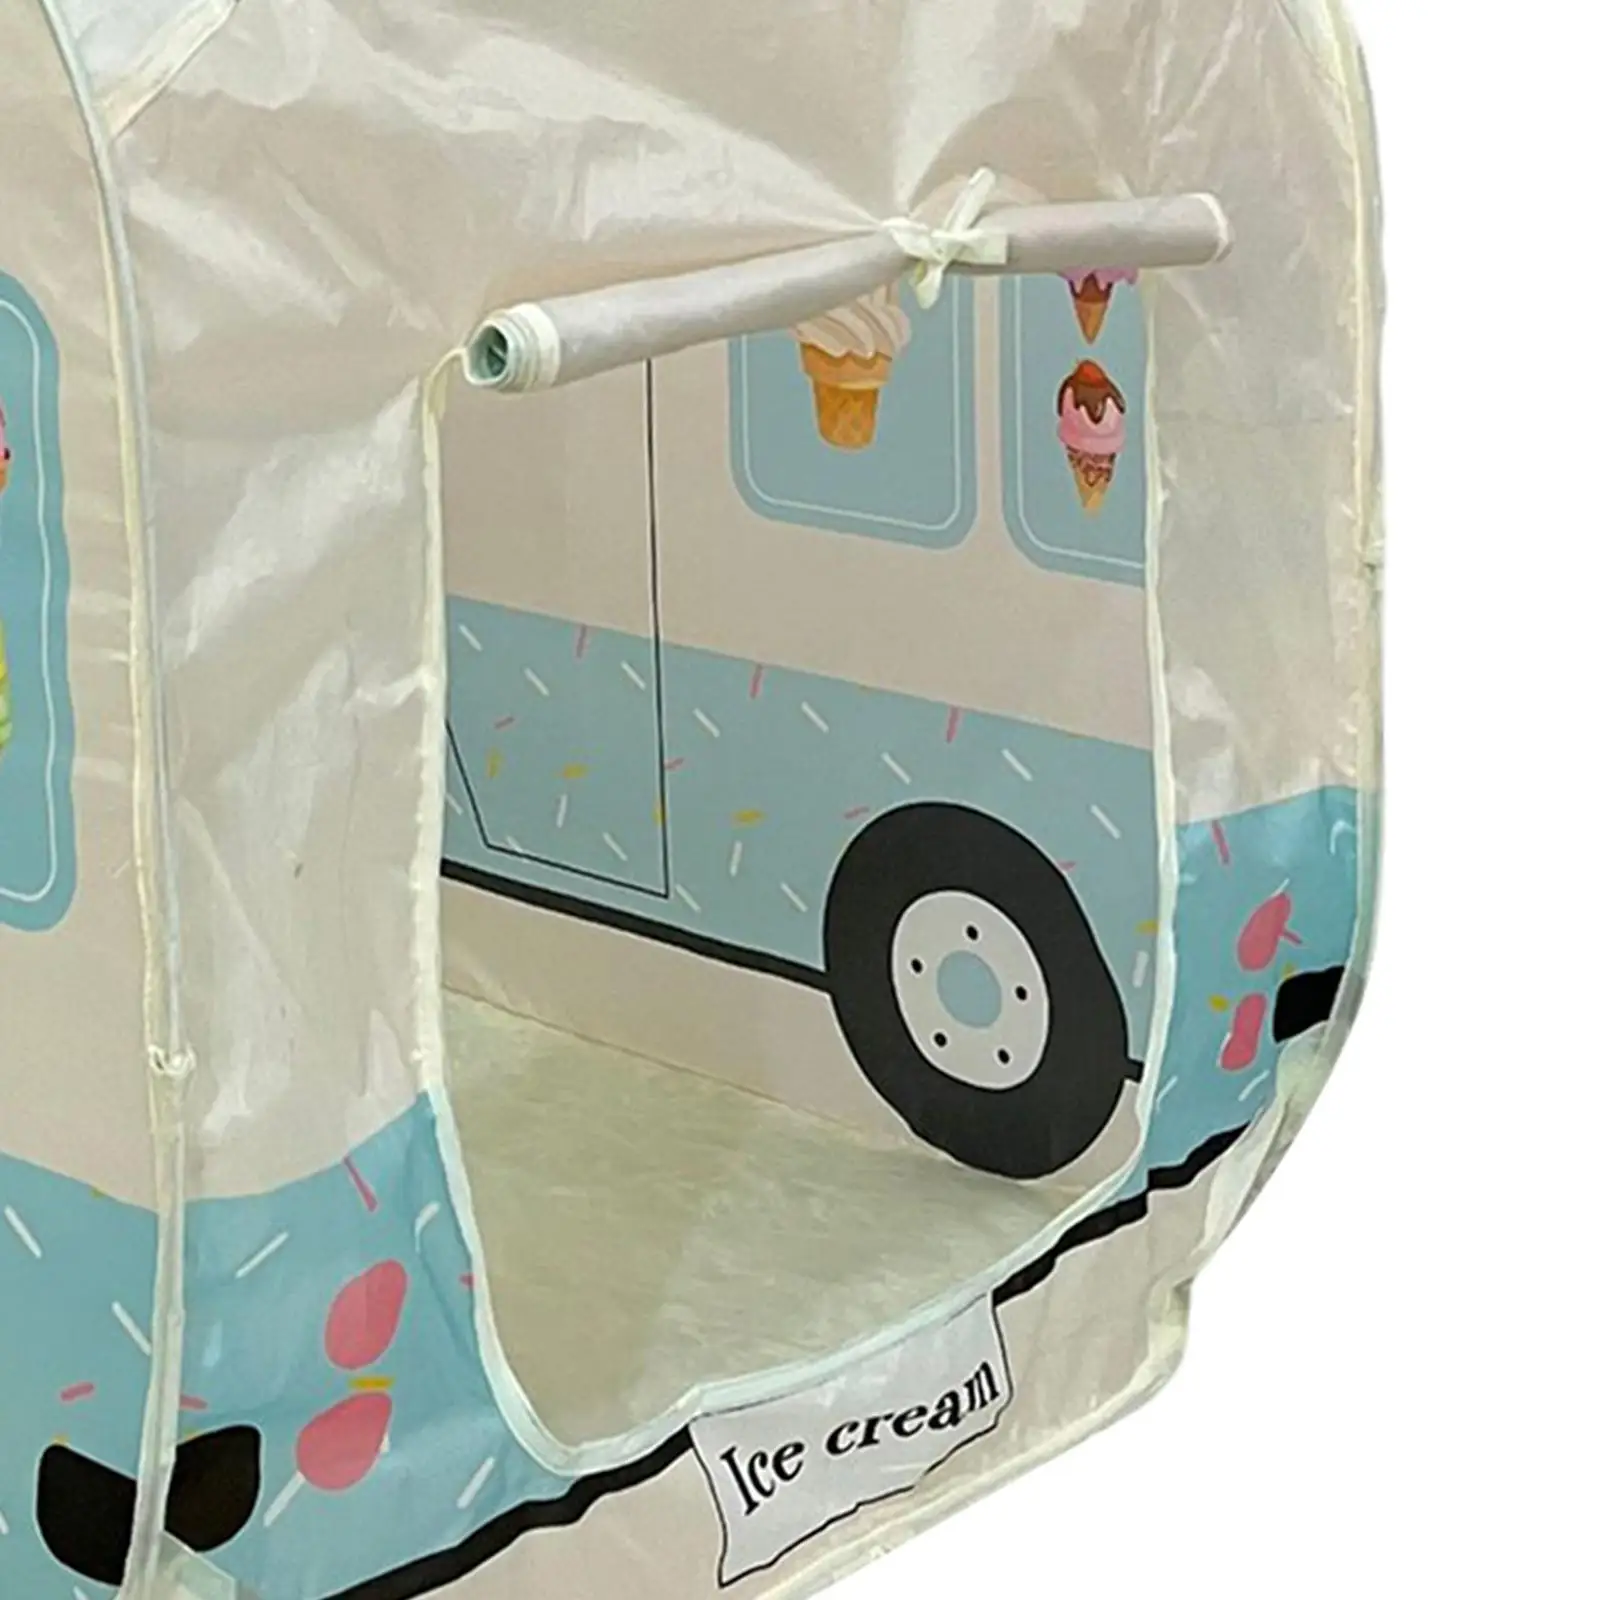 Ice Cream Truck Tent Gifts Child Room Decoration Indoor Playhouse for Kids